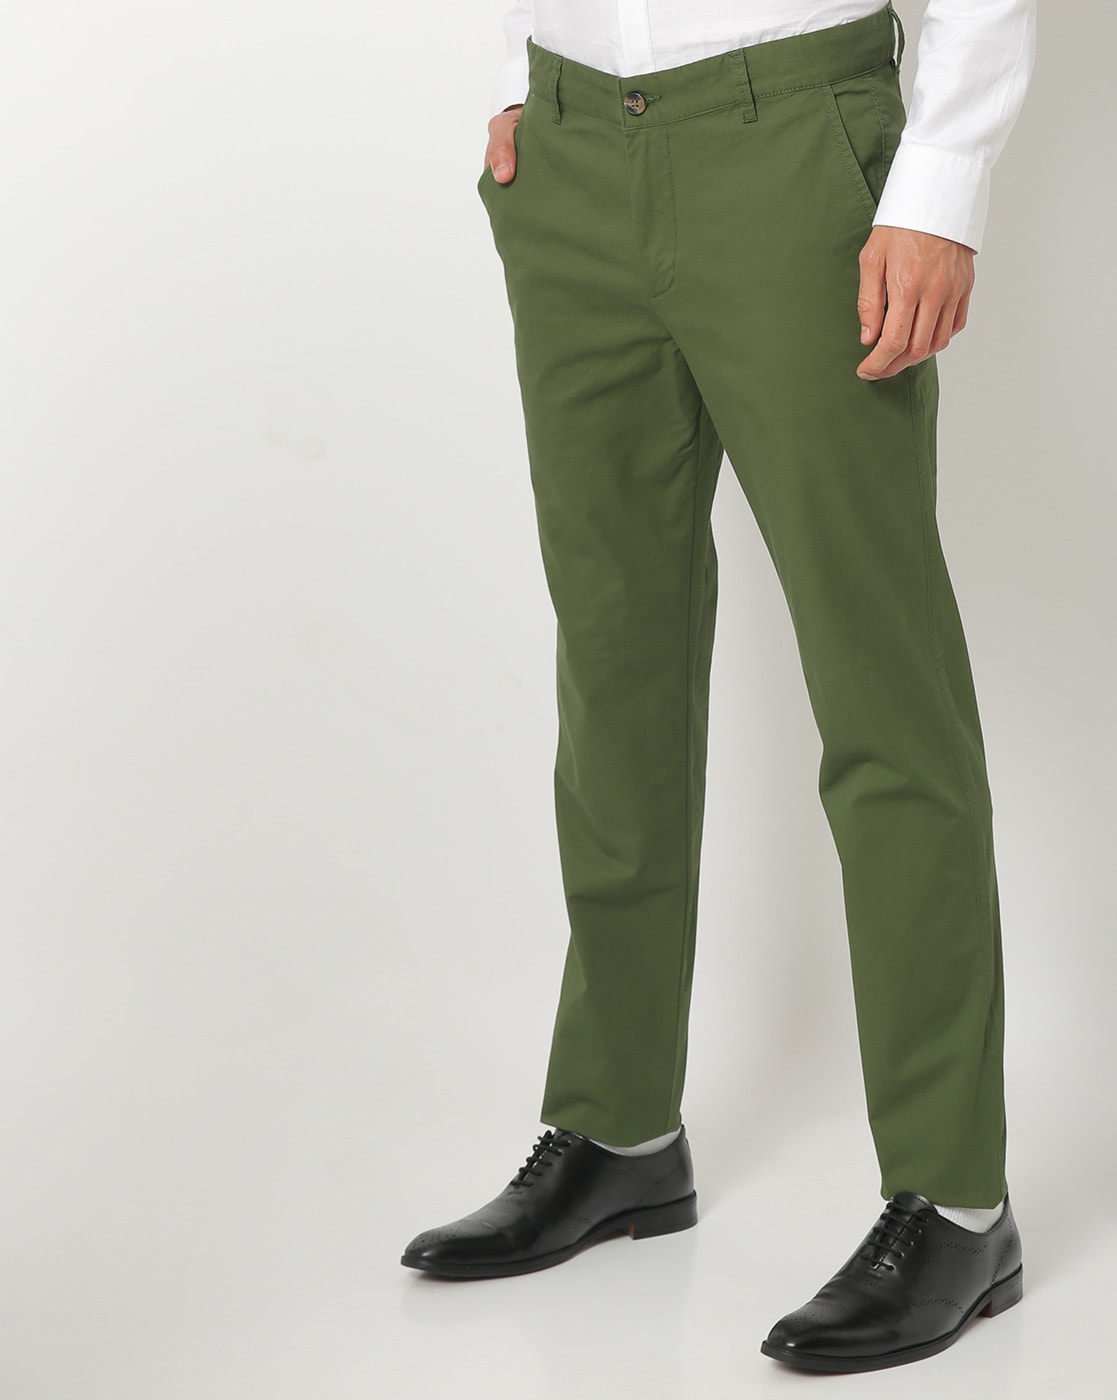 Best Shirt and Pant Combination For Men | Green pants men, Shirt outfit men,  Shirt and pants combinations for men